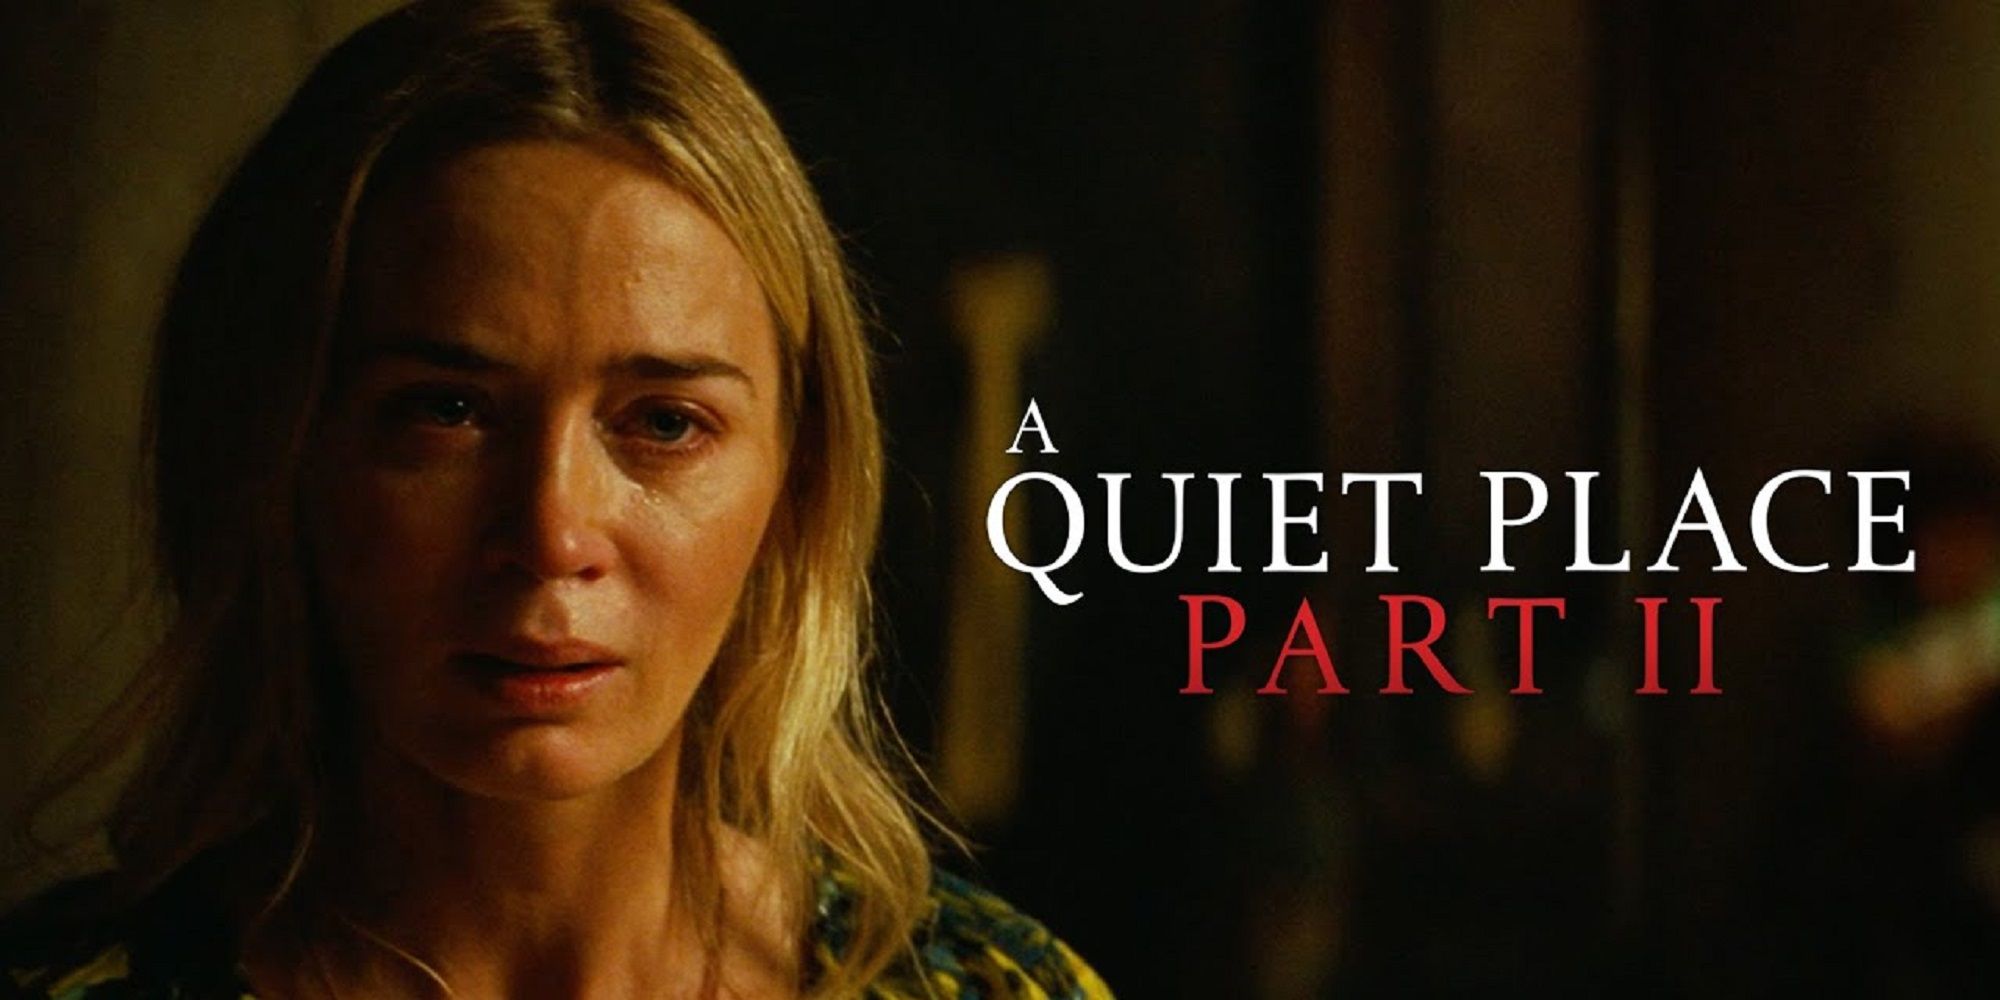 A Quiet Place Part II Movie Review- A Master Class in Suspense